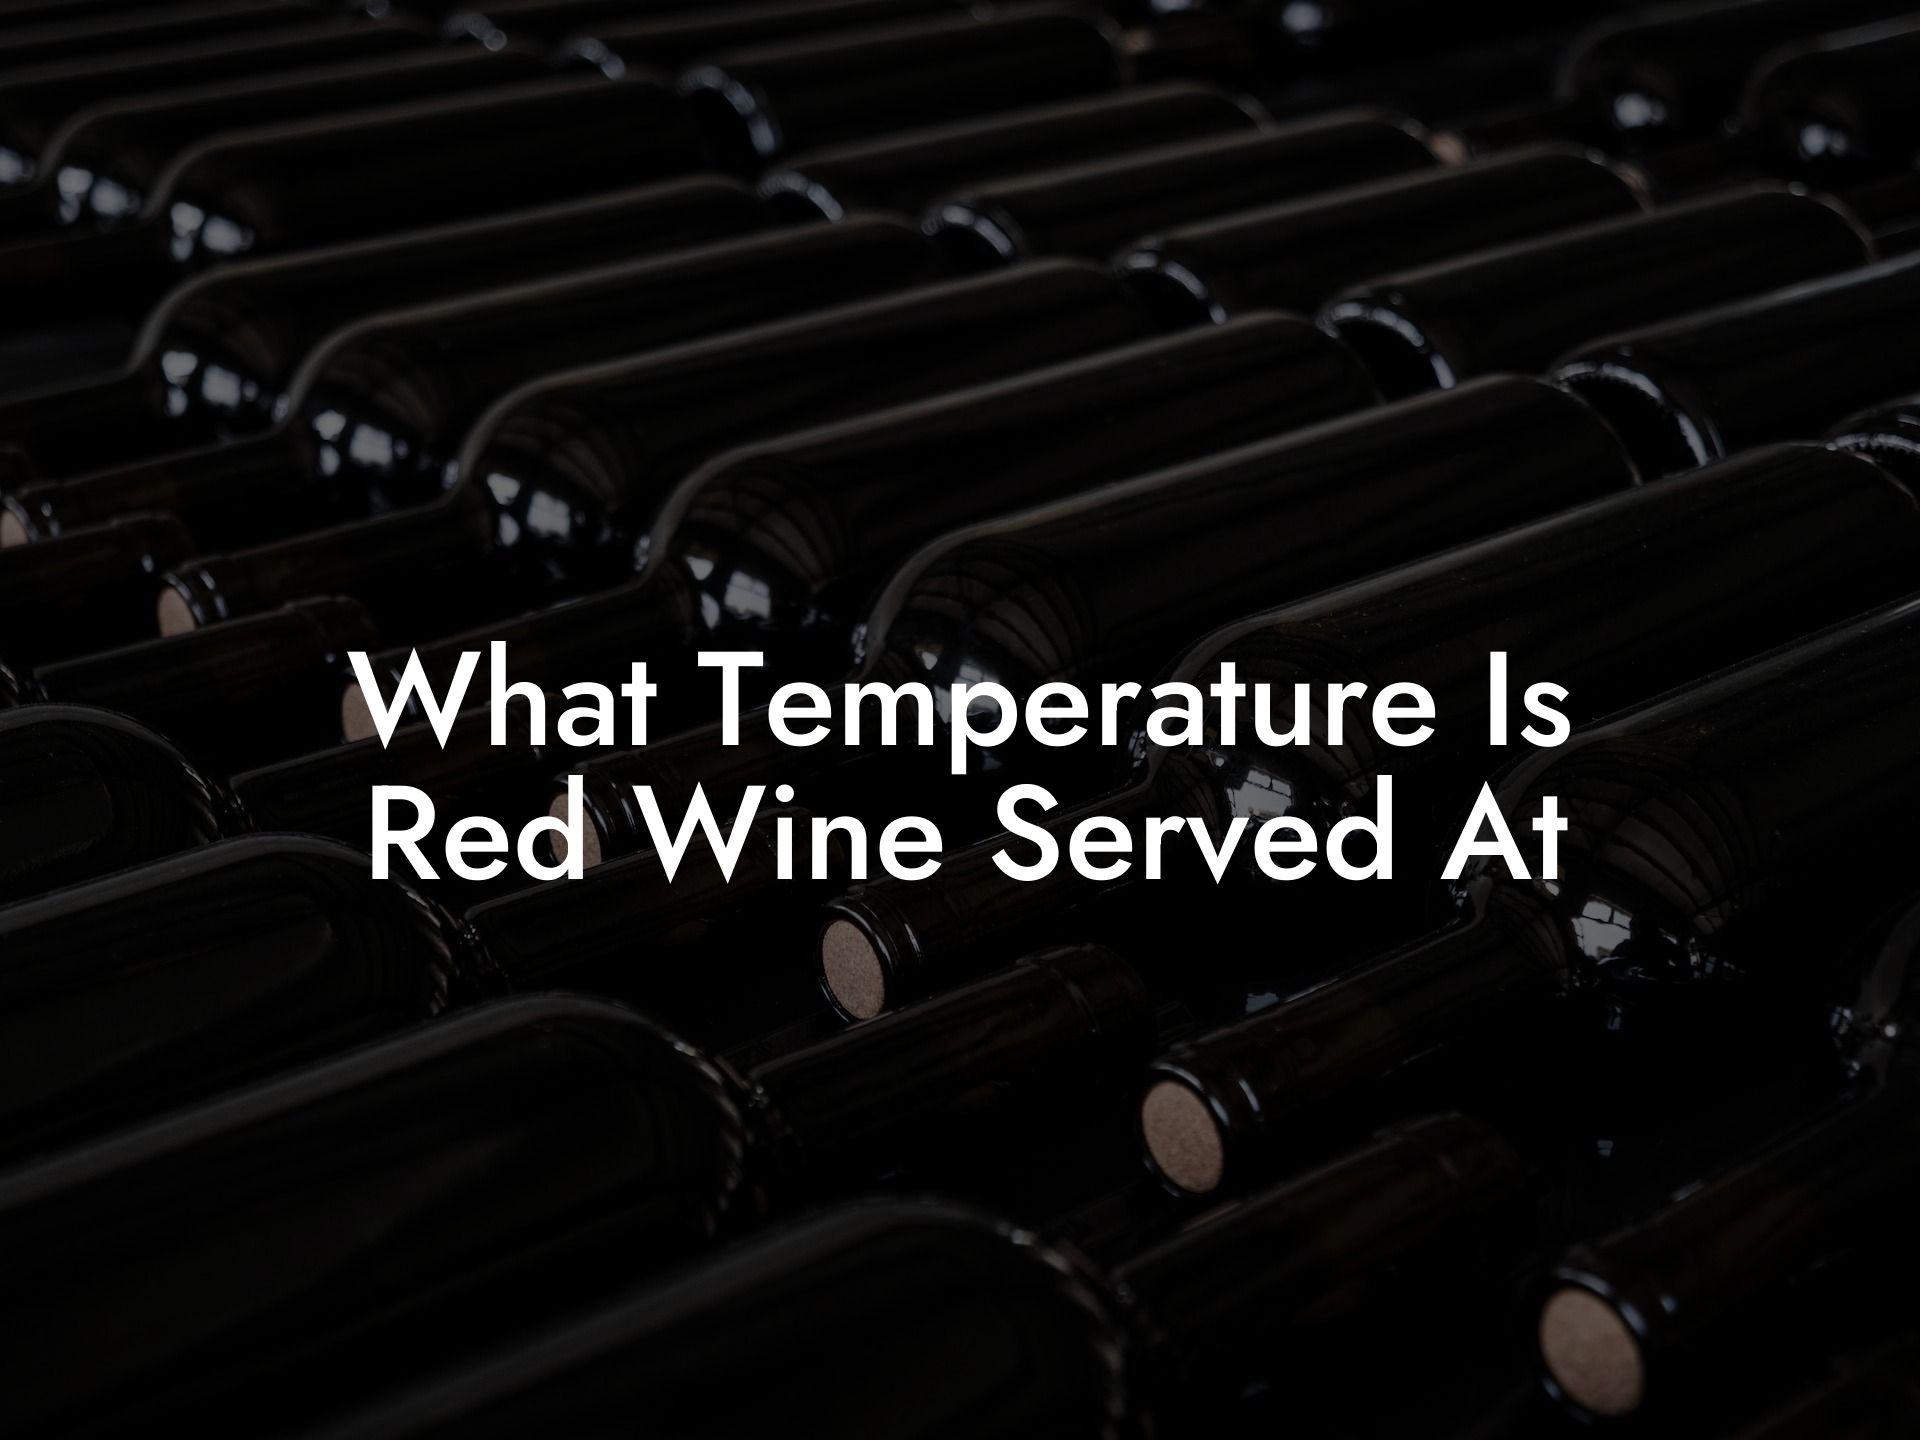 What Temperature Is Red Wine Served At